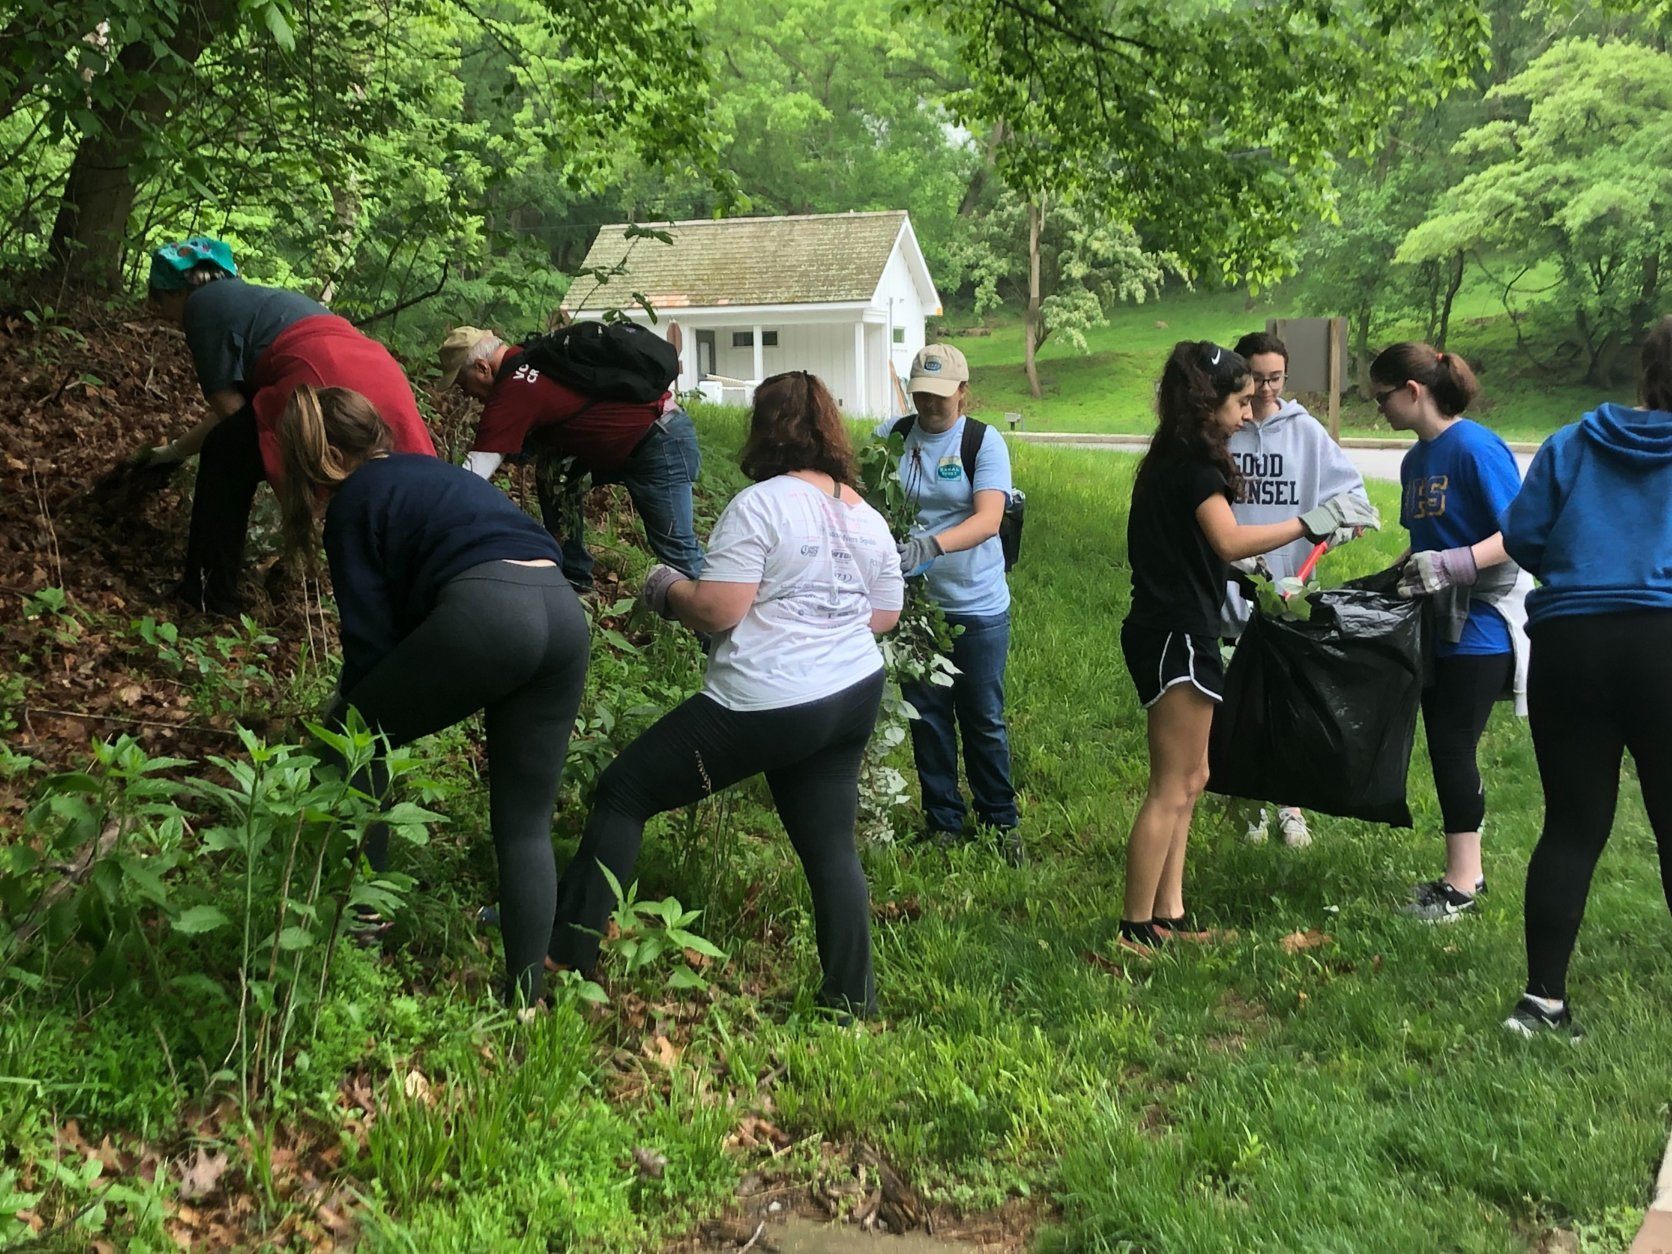 Volunteers clean up the area surrounding the C&O canal during Canal Days on May 4, 2019. (WTOP/Melissa Howell)